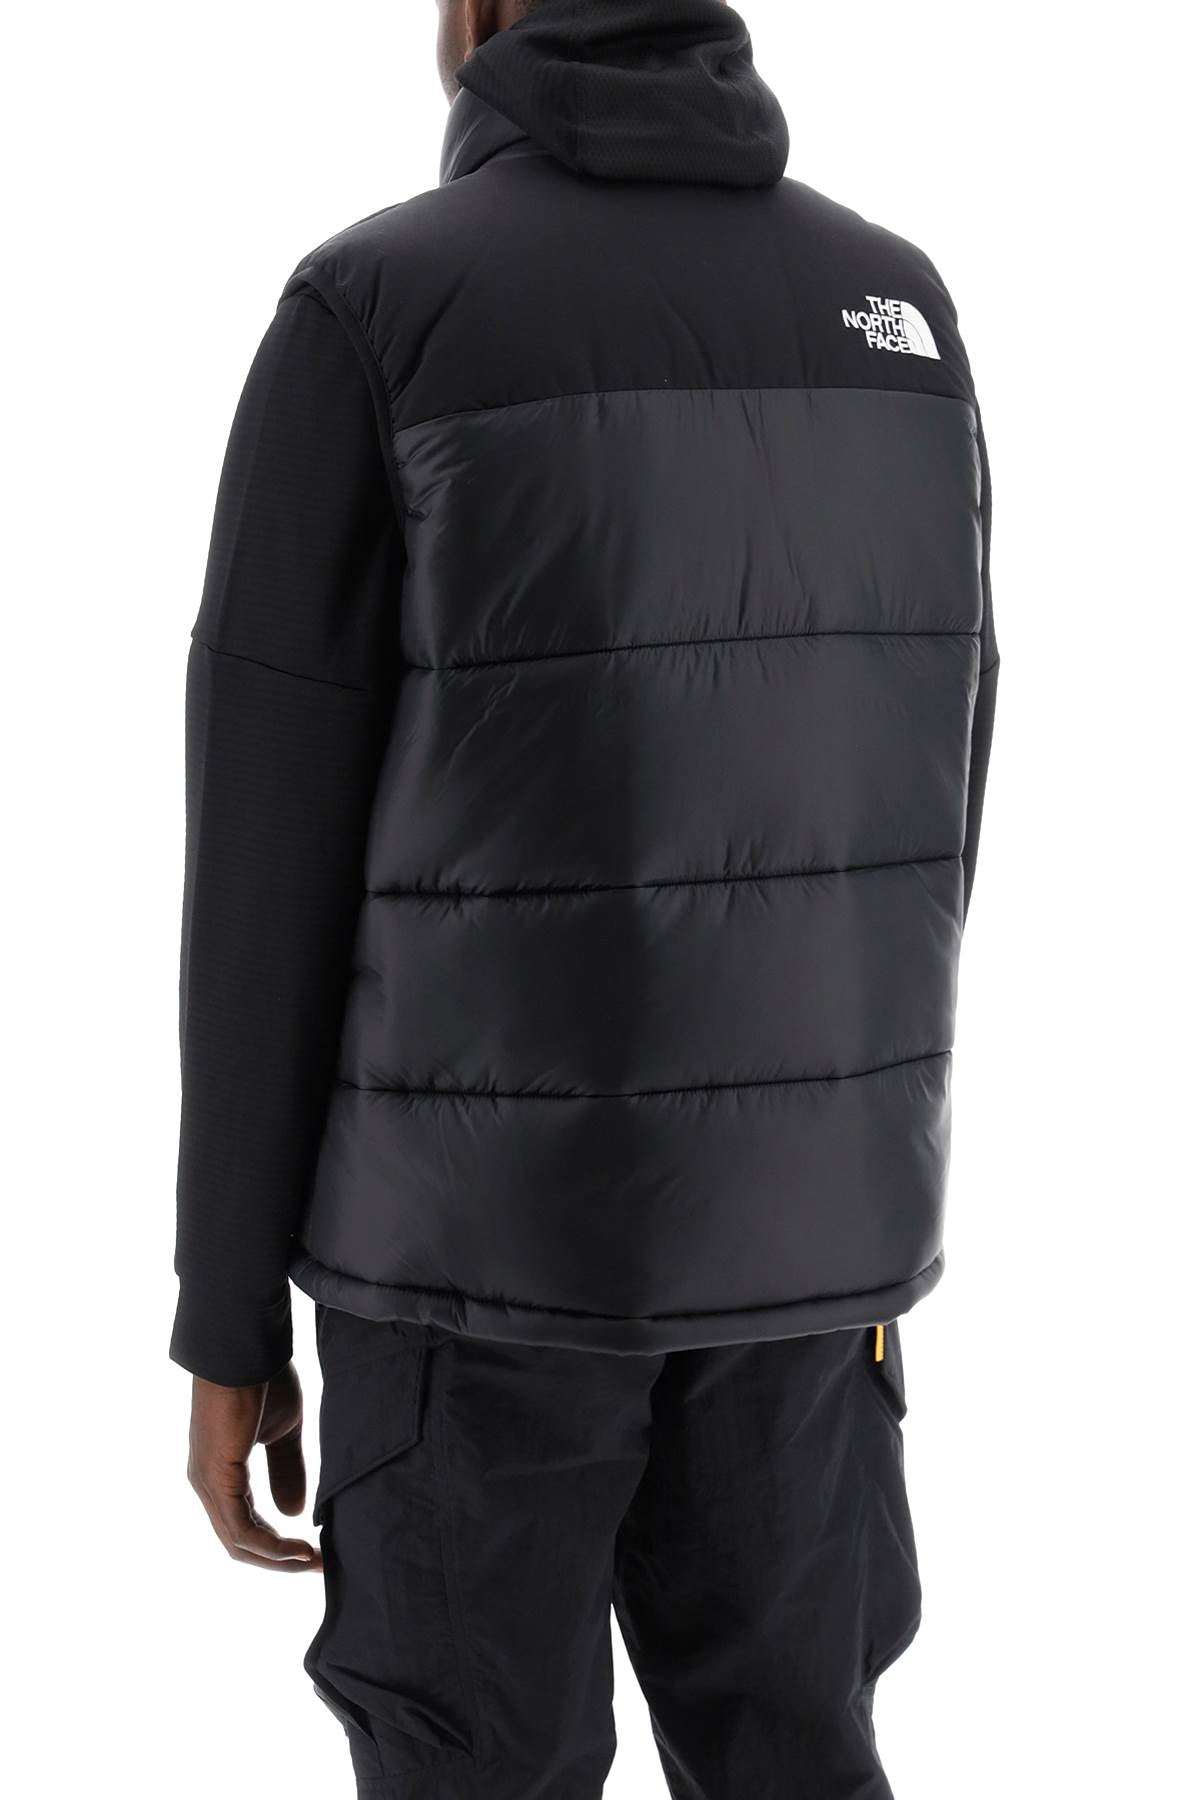 The north face himalayan padded vest-2